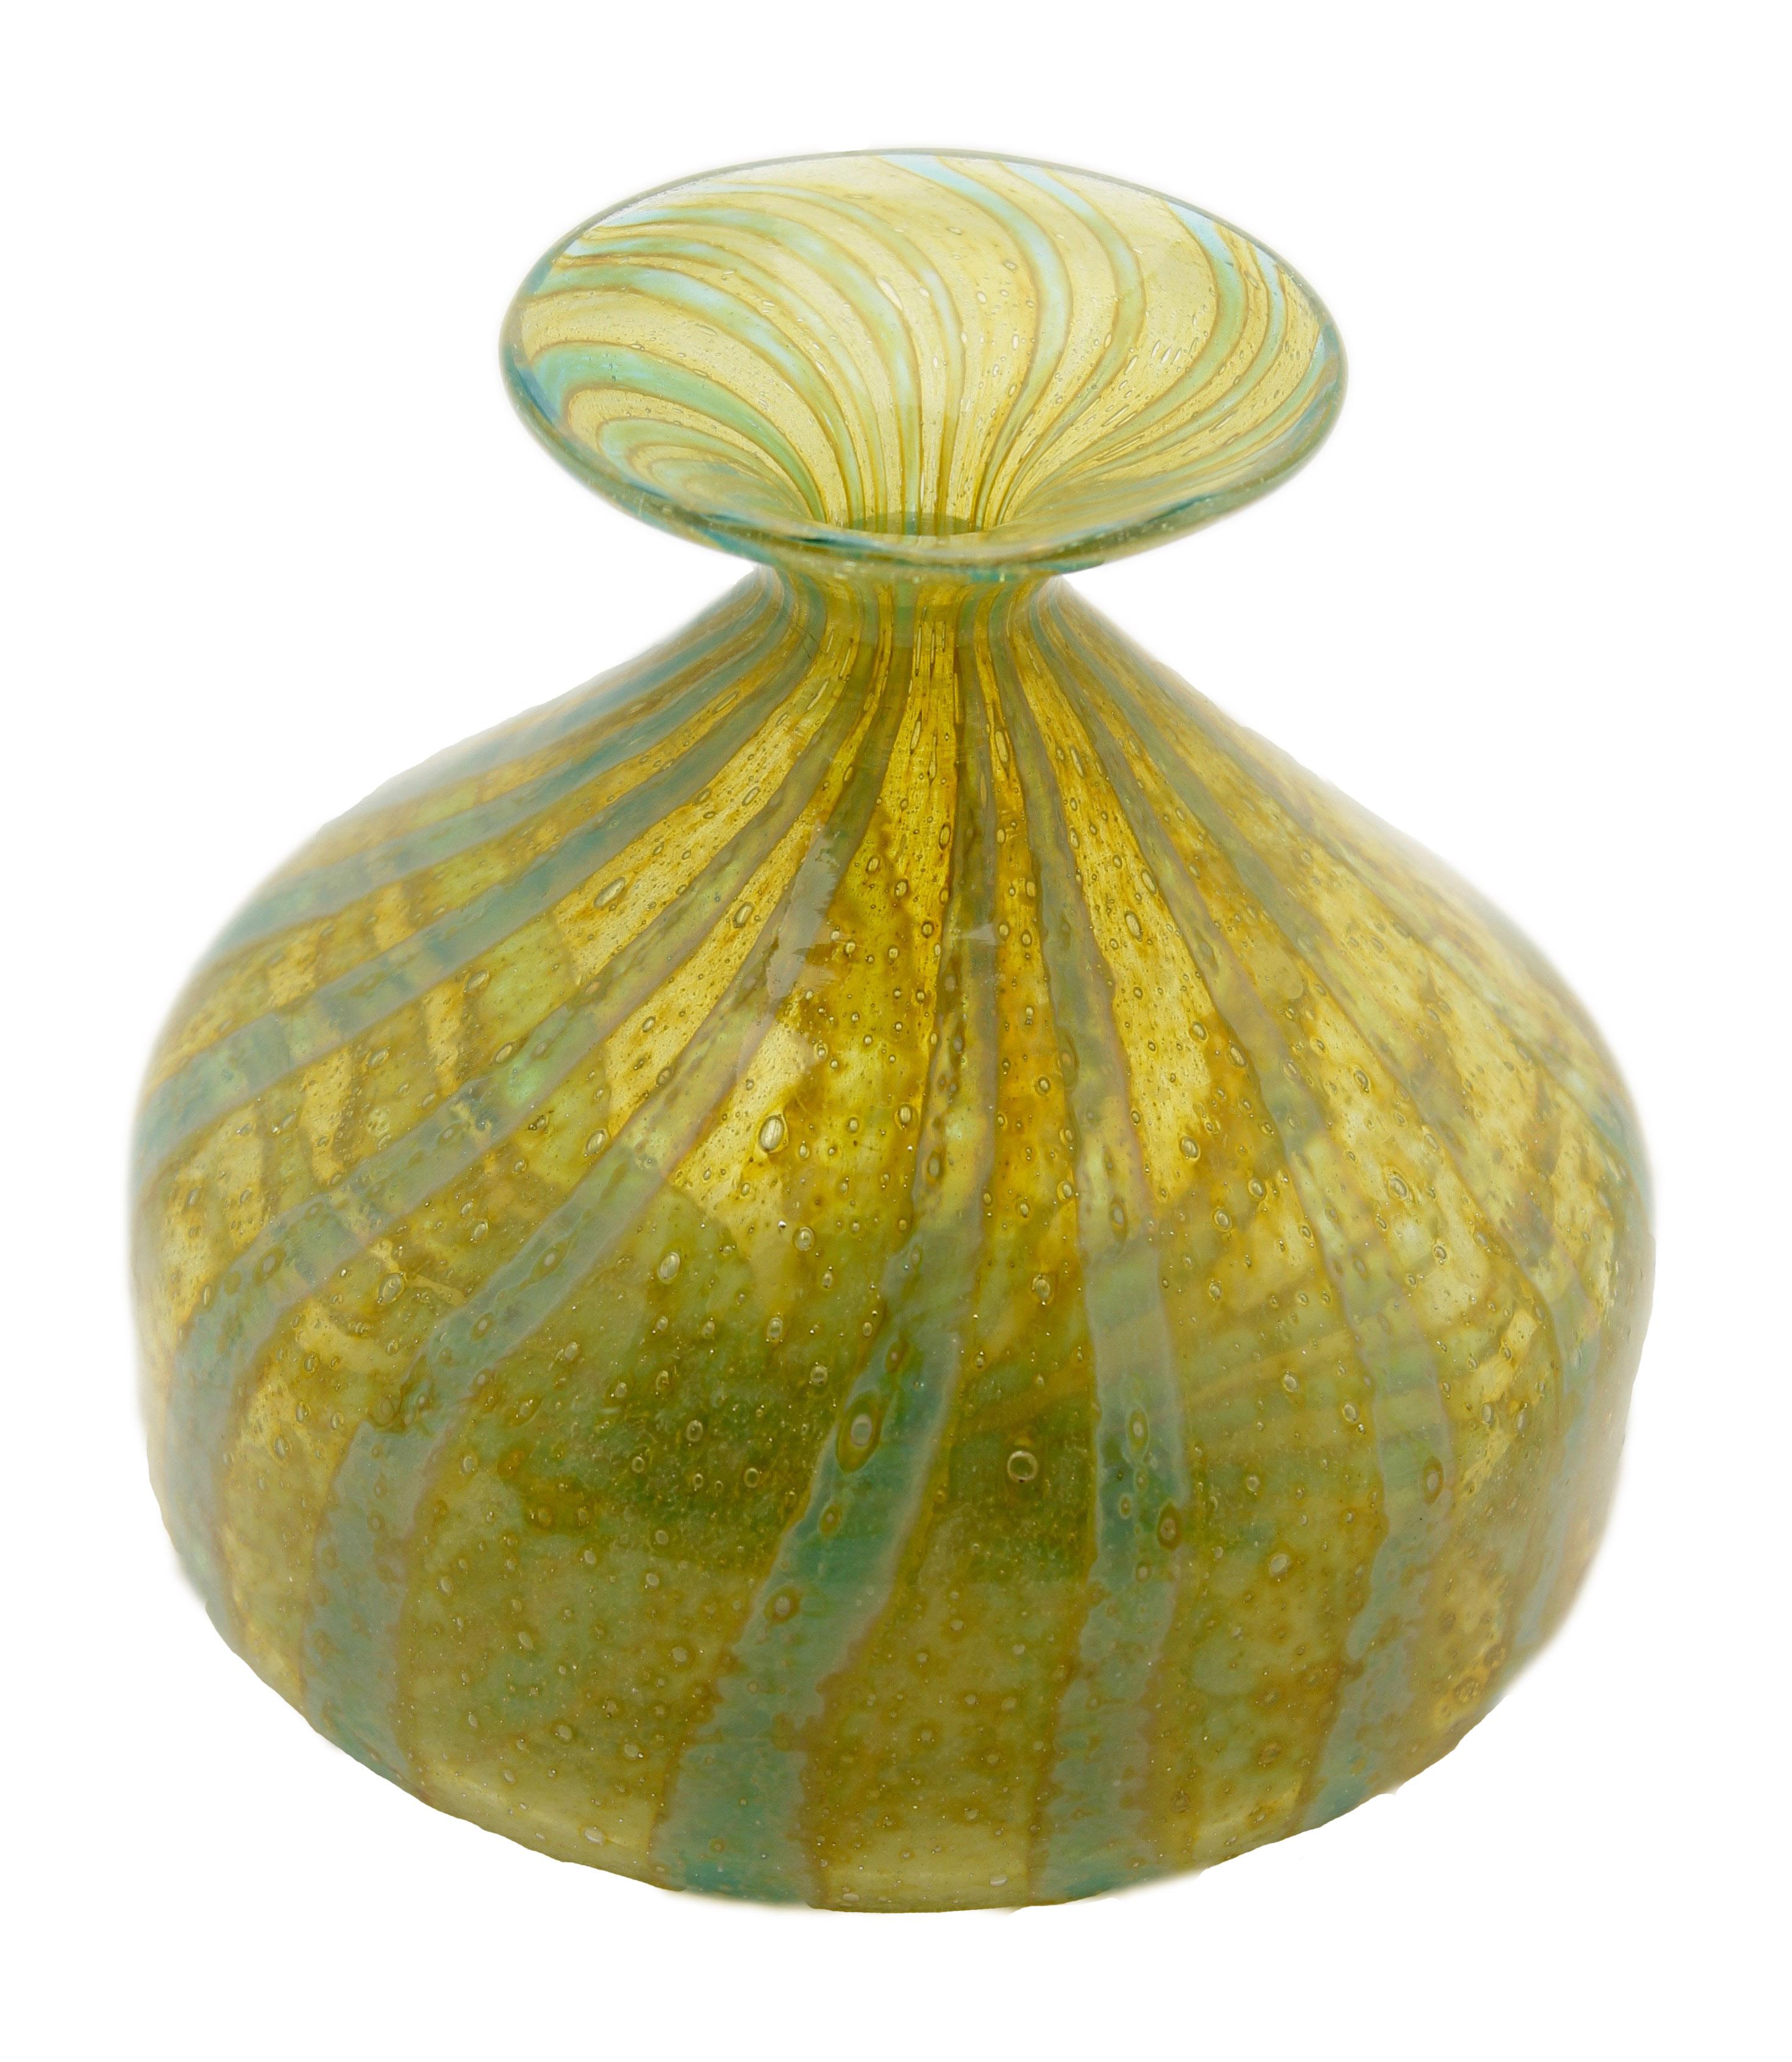 Hand blown Mdina solifleur vase with the wide-rimmed mouth, (1970-1975).
Features typical Mediterranean colors, threads of sea-green swirling over a base of the yellow-green glass with bubble inclusions.
Made on the island of Malta to demonstrate